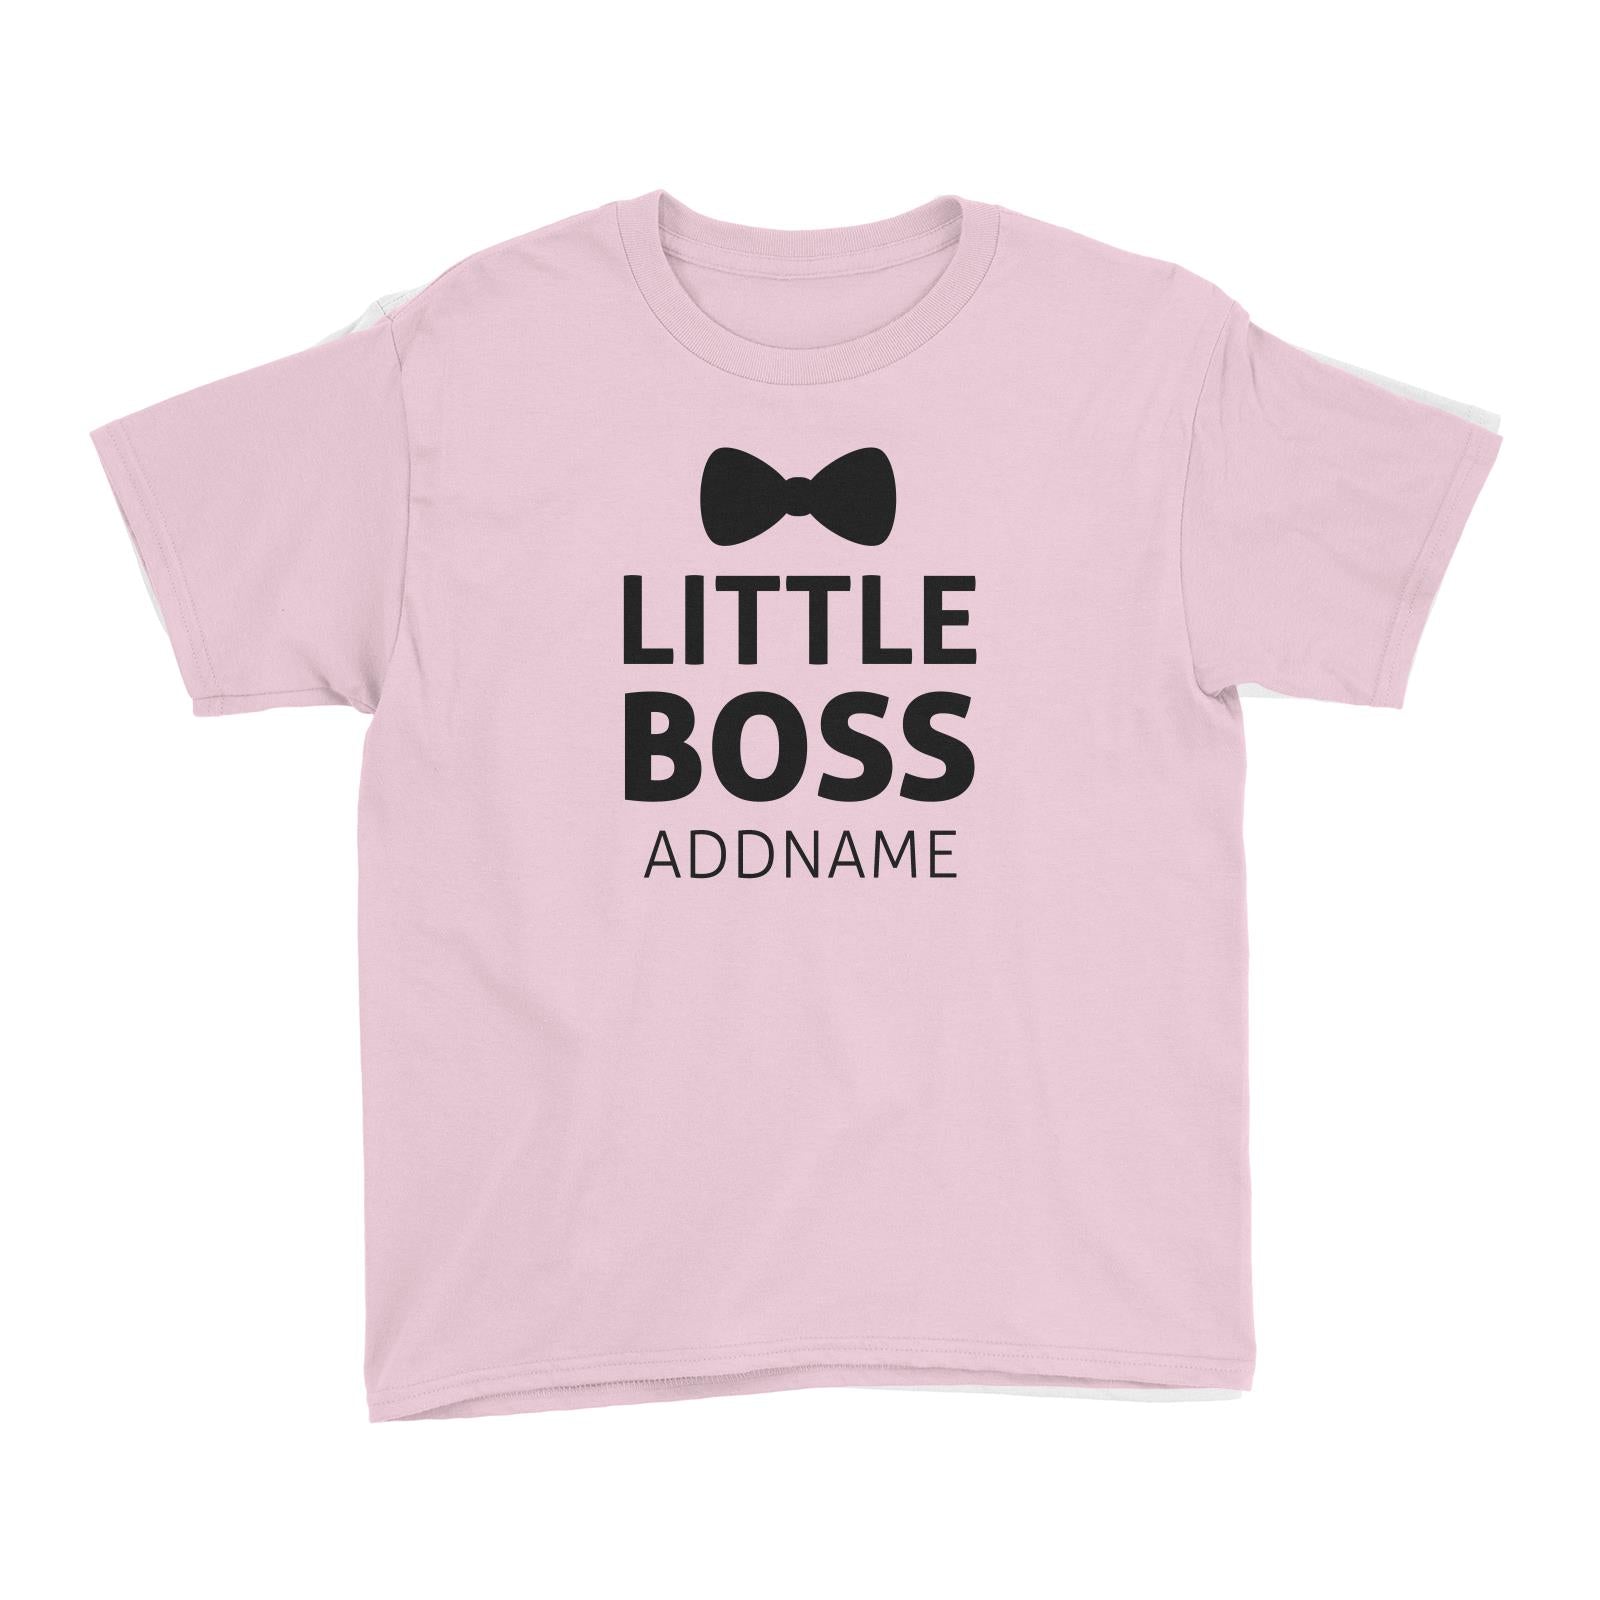 Little Boss With Bow Tie Kid's T-Shirt